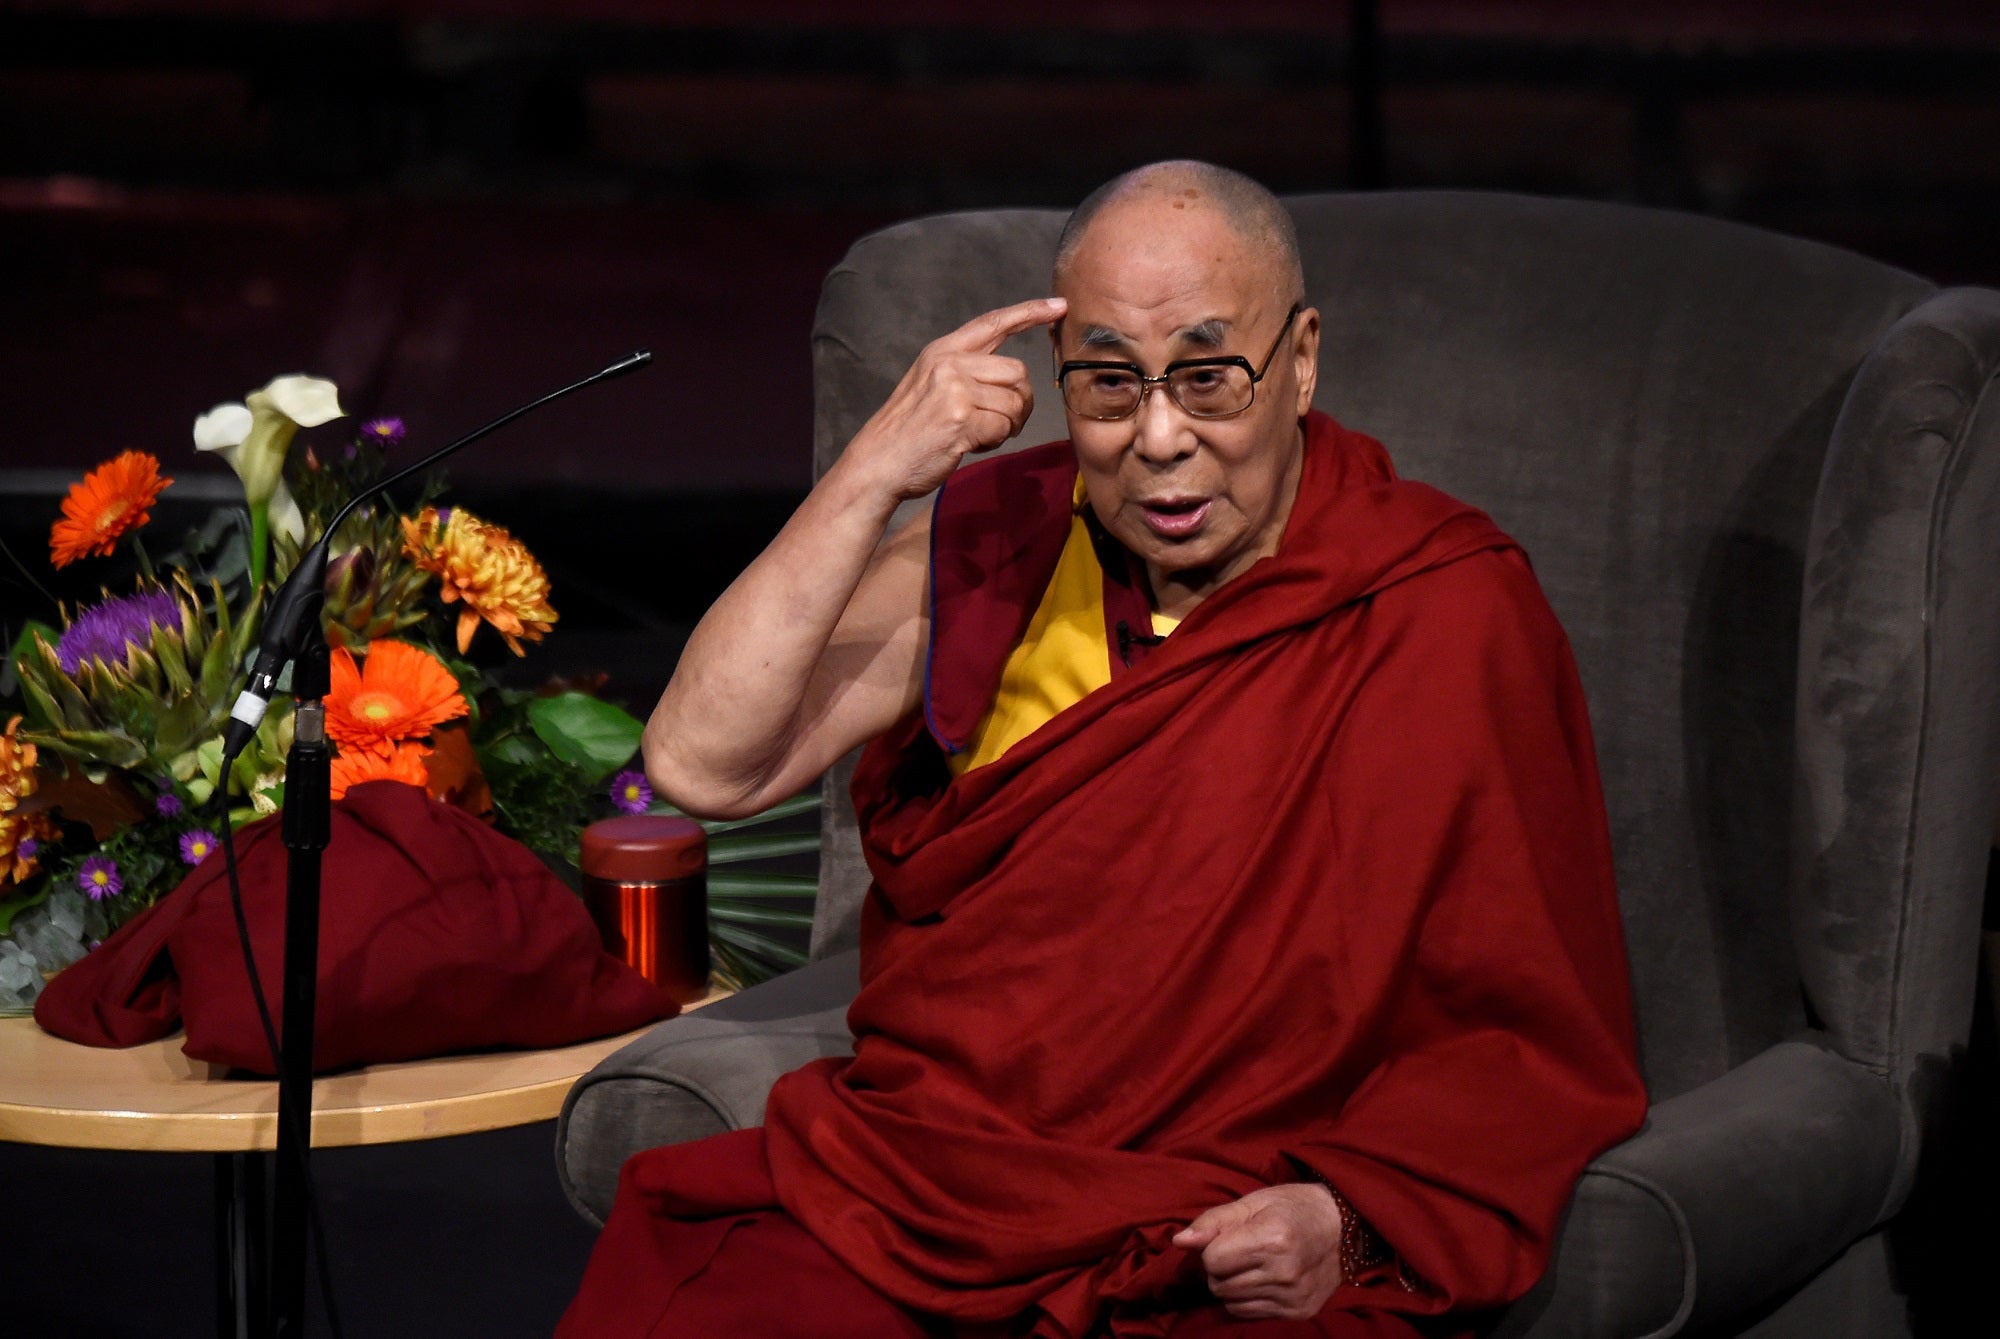 The Dalai Lama is not the first religious leader to criticise Trump